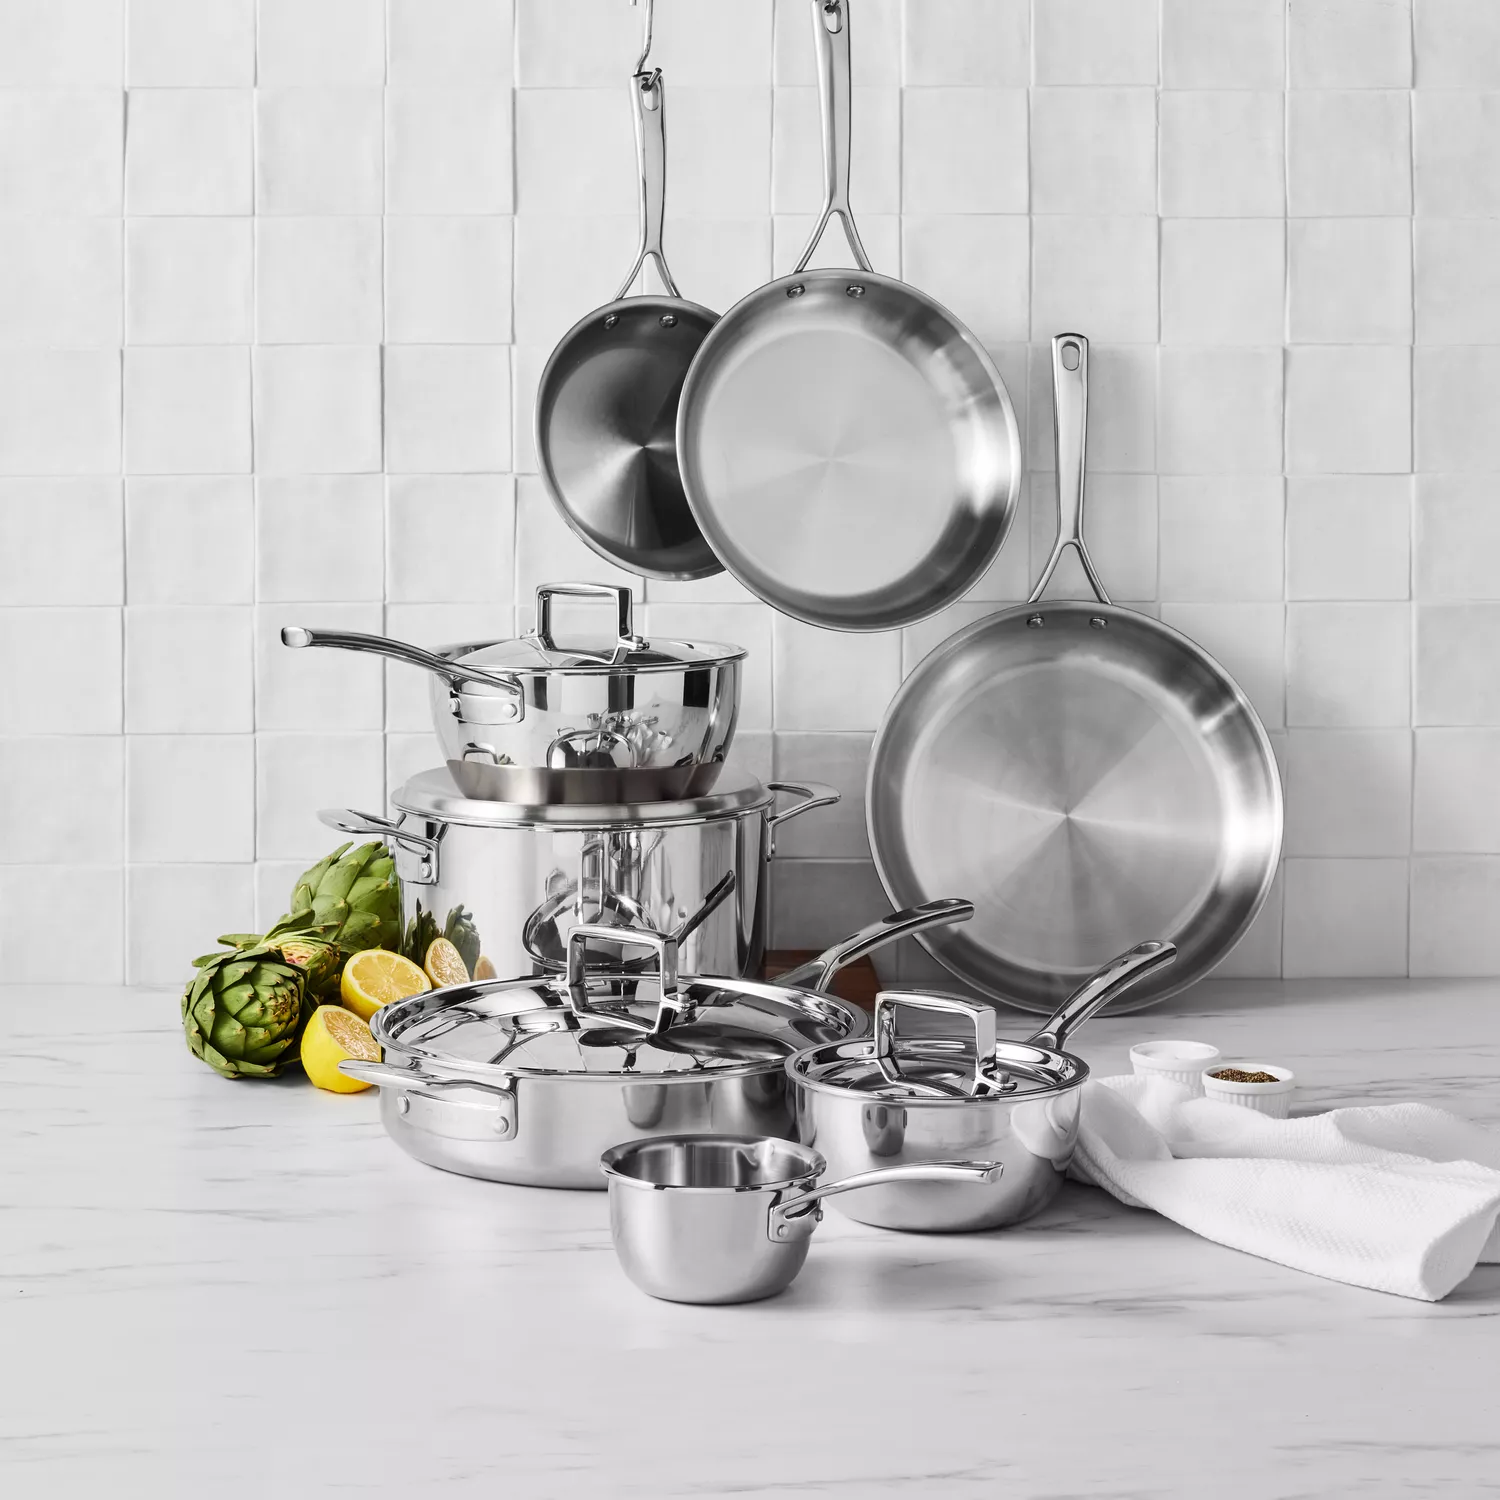 Sur La Table Classic 5-Ply Stainless Steel 10-Piece Cookware Set